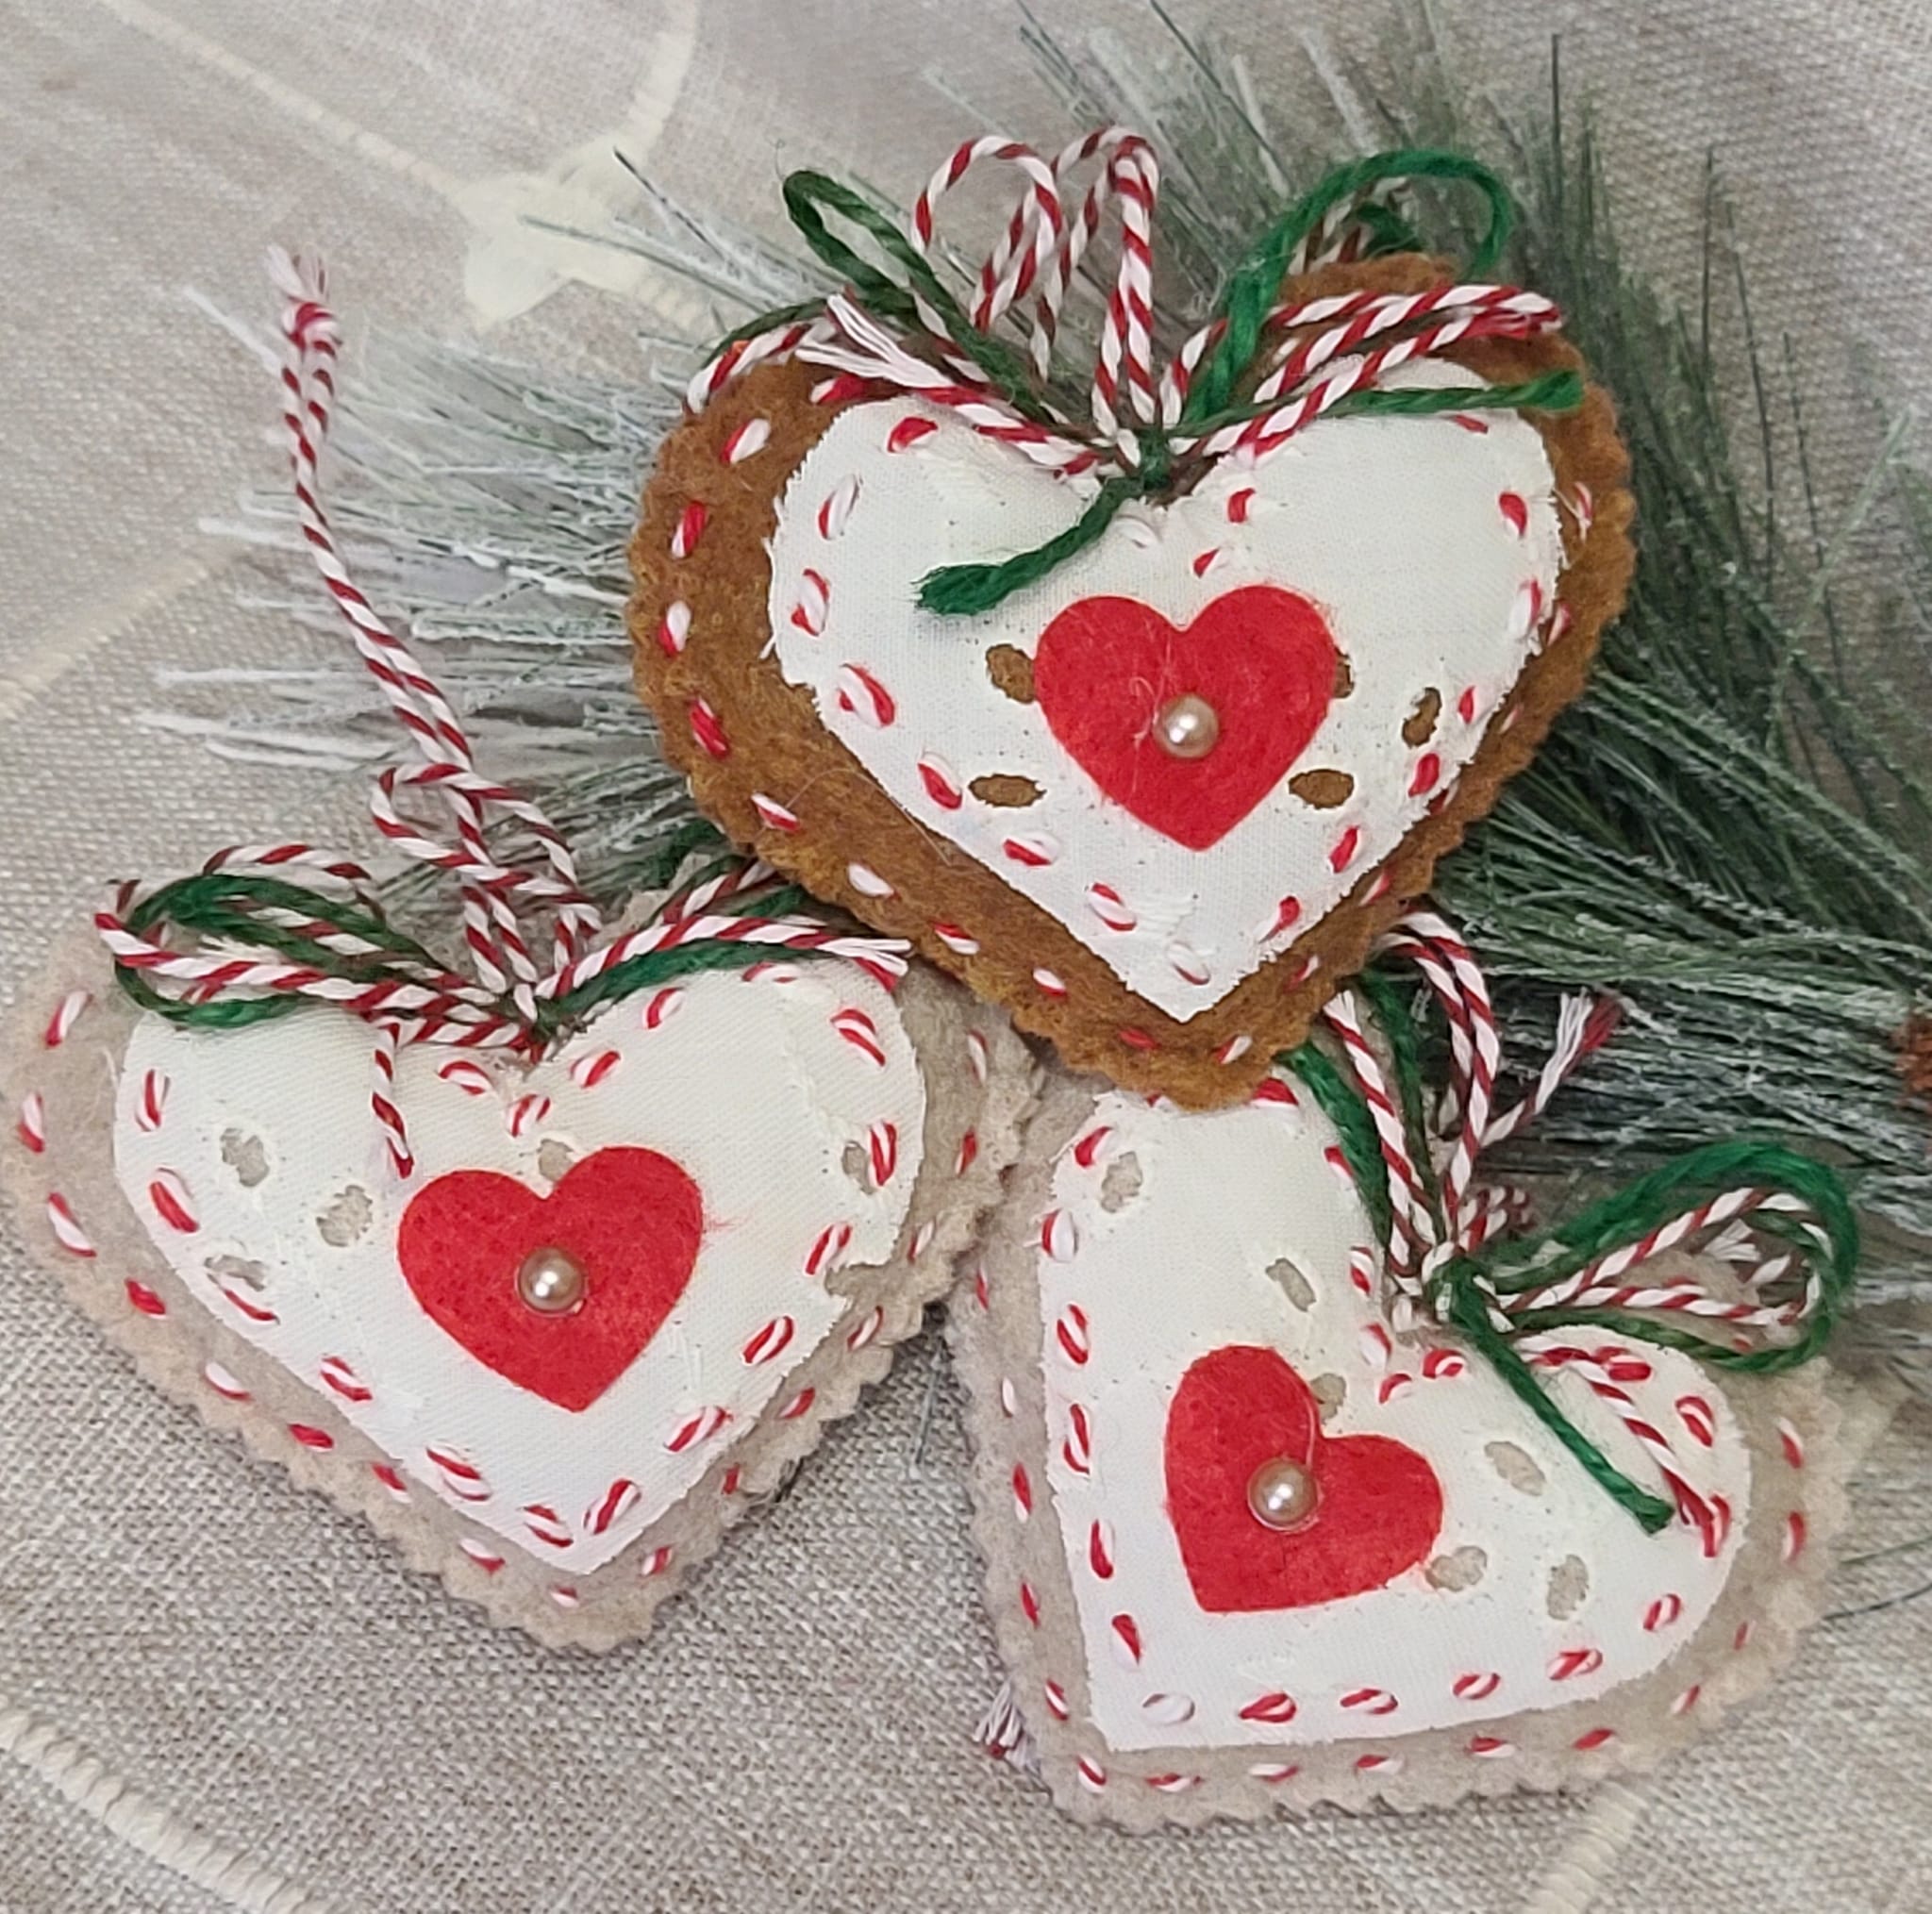 Cookie dough and gingerbread felt hearts with lace set of 3 - Click Image to Close